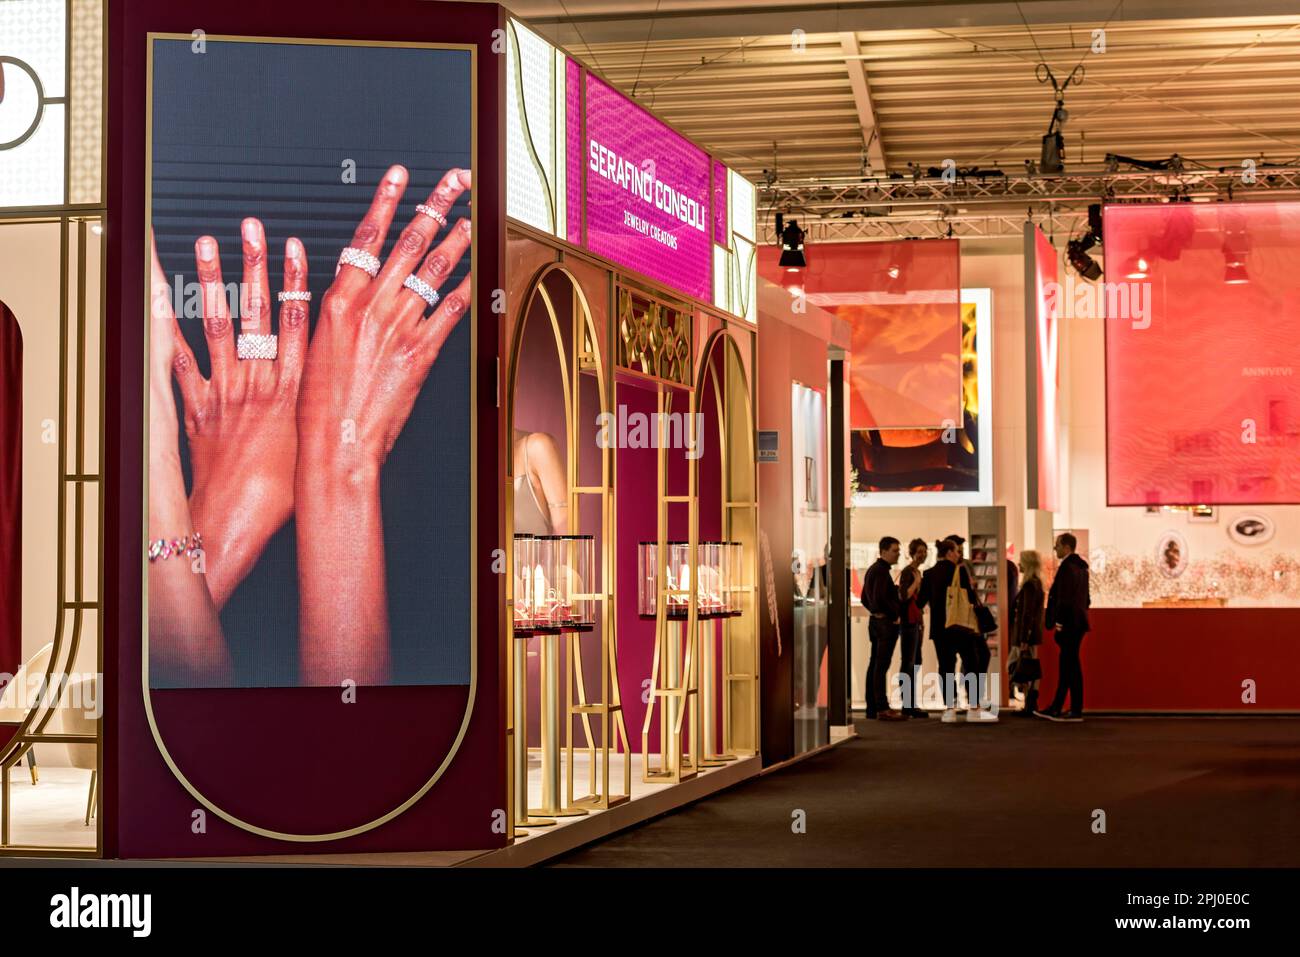 Video wall with precious rings on womans hands, exhibition stand of jeweller Serafino Consoli Juwelery Creators, Inhorgenta, trade fair for jewellery Stock Photo